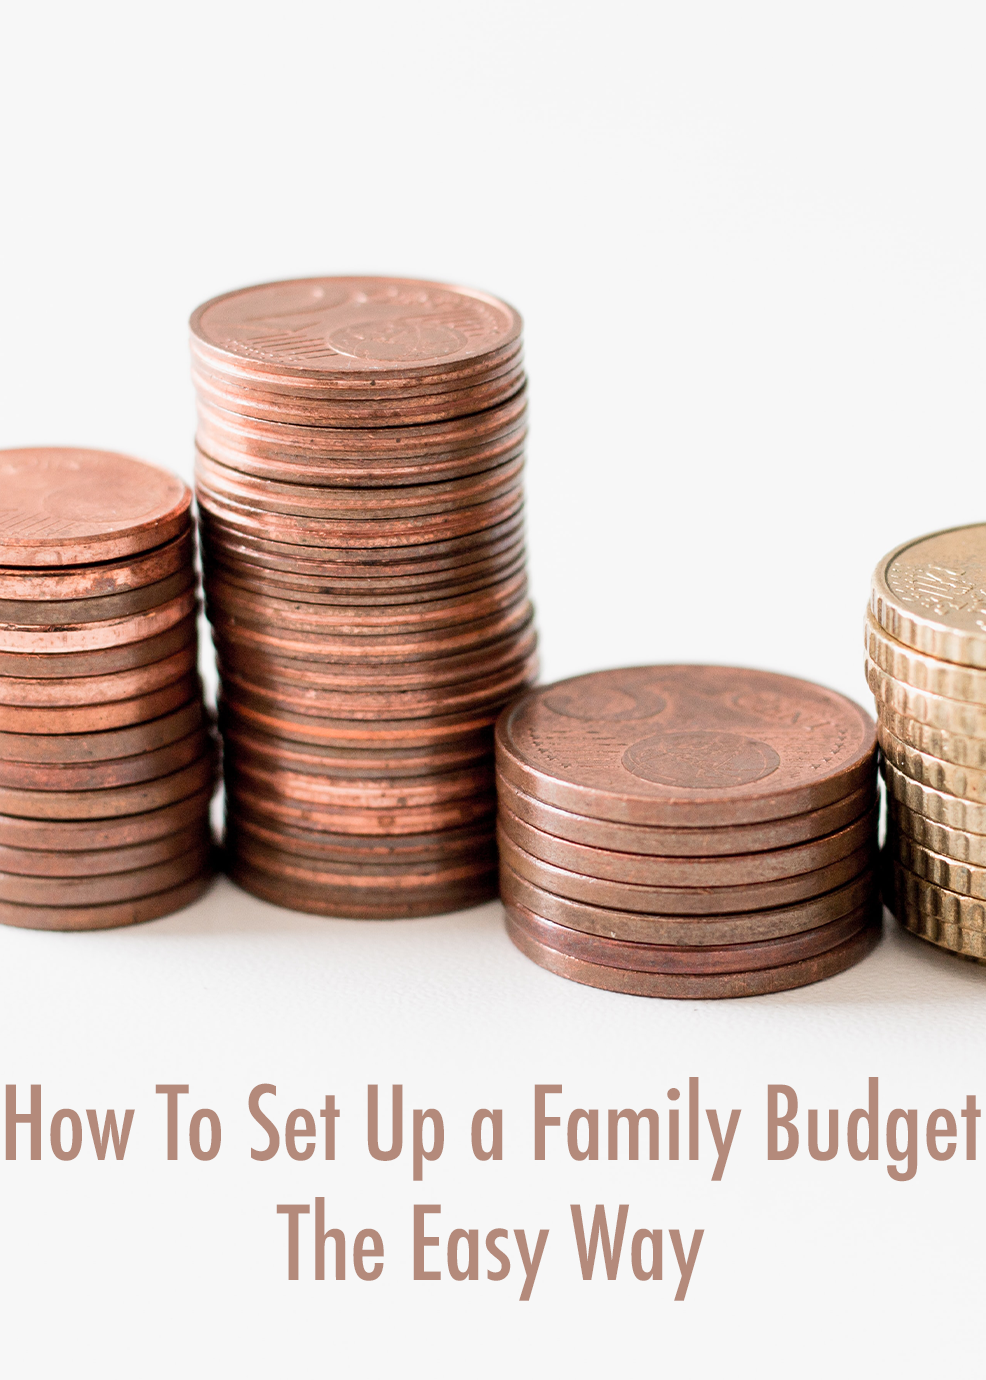 How To Set Up a Family Budget The Easy Way